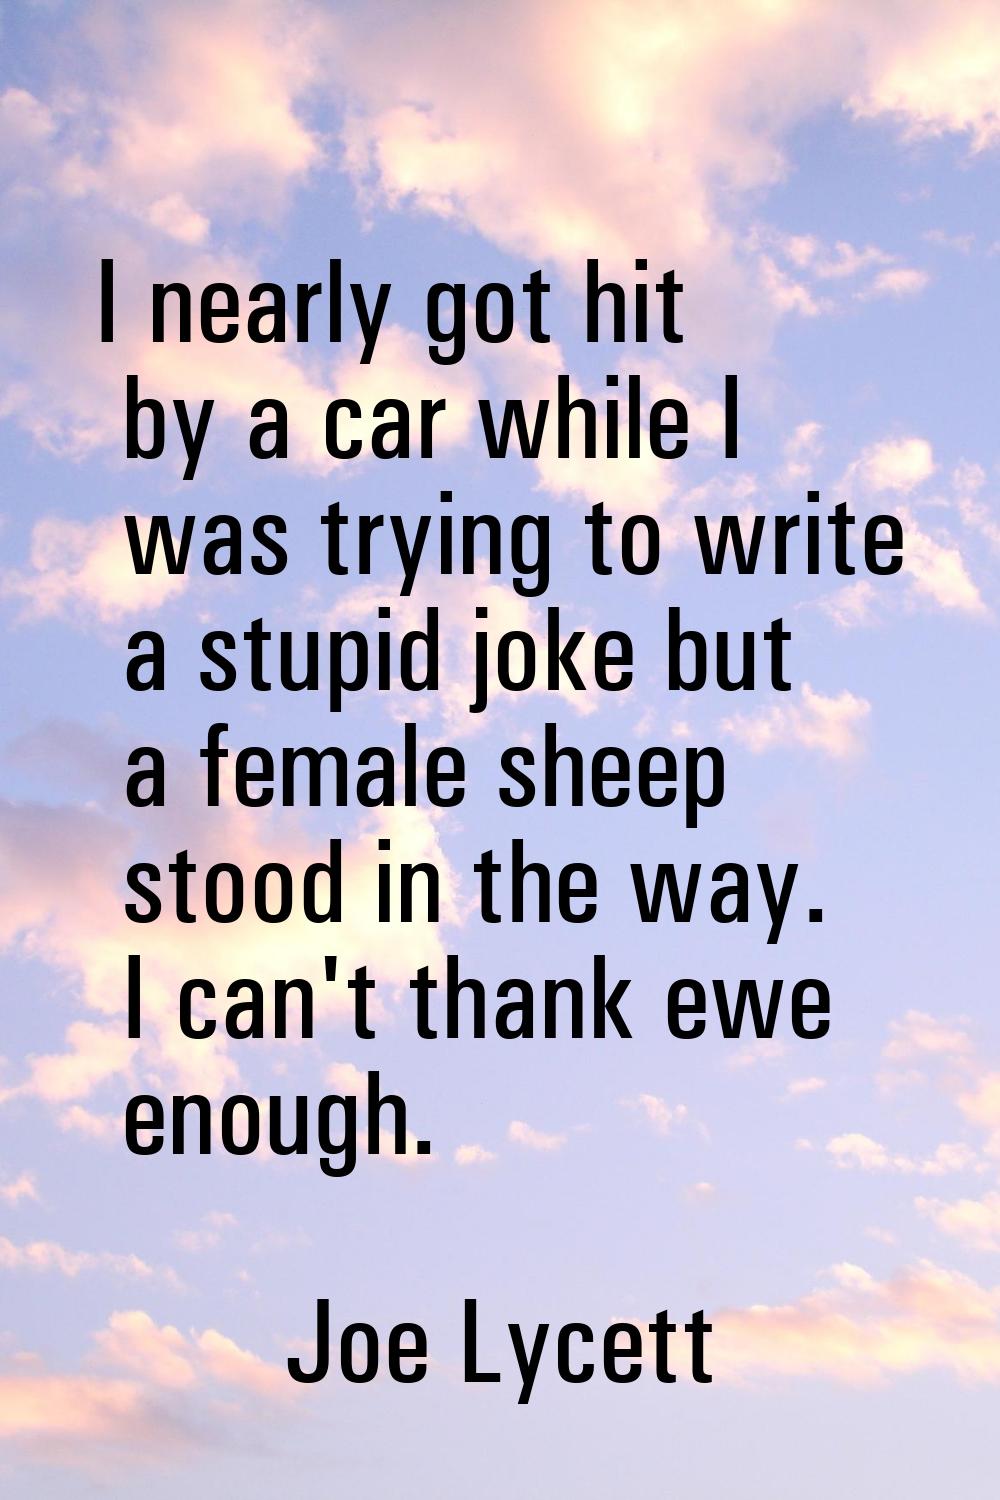 I nearly got hit by a car while I was trying to write a stupid joke but a female sheep stood in the